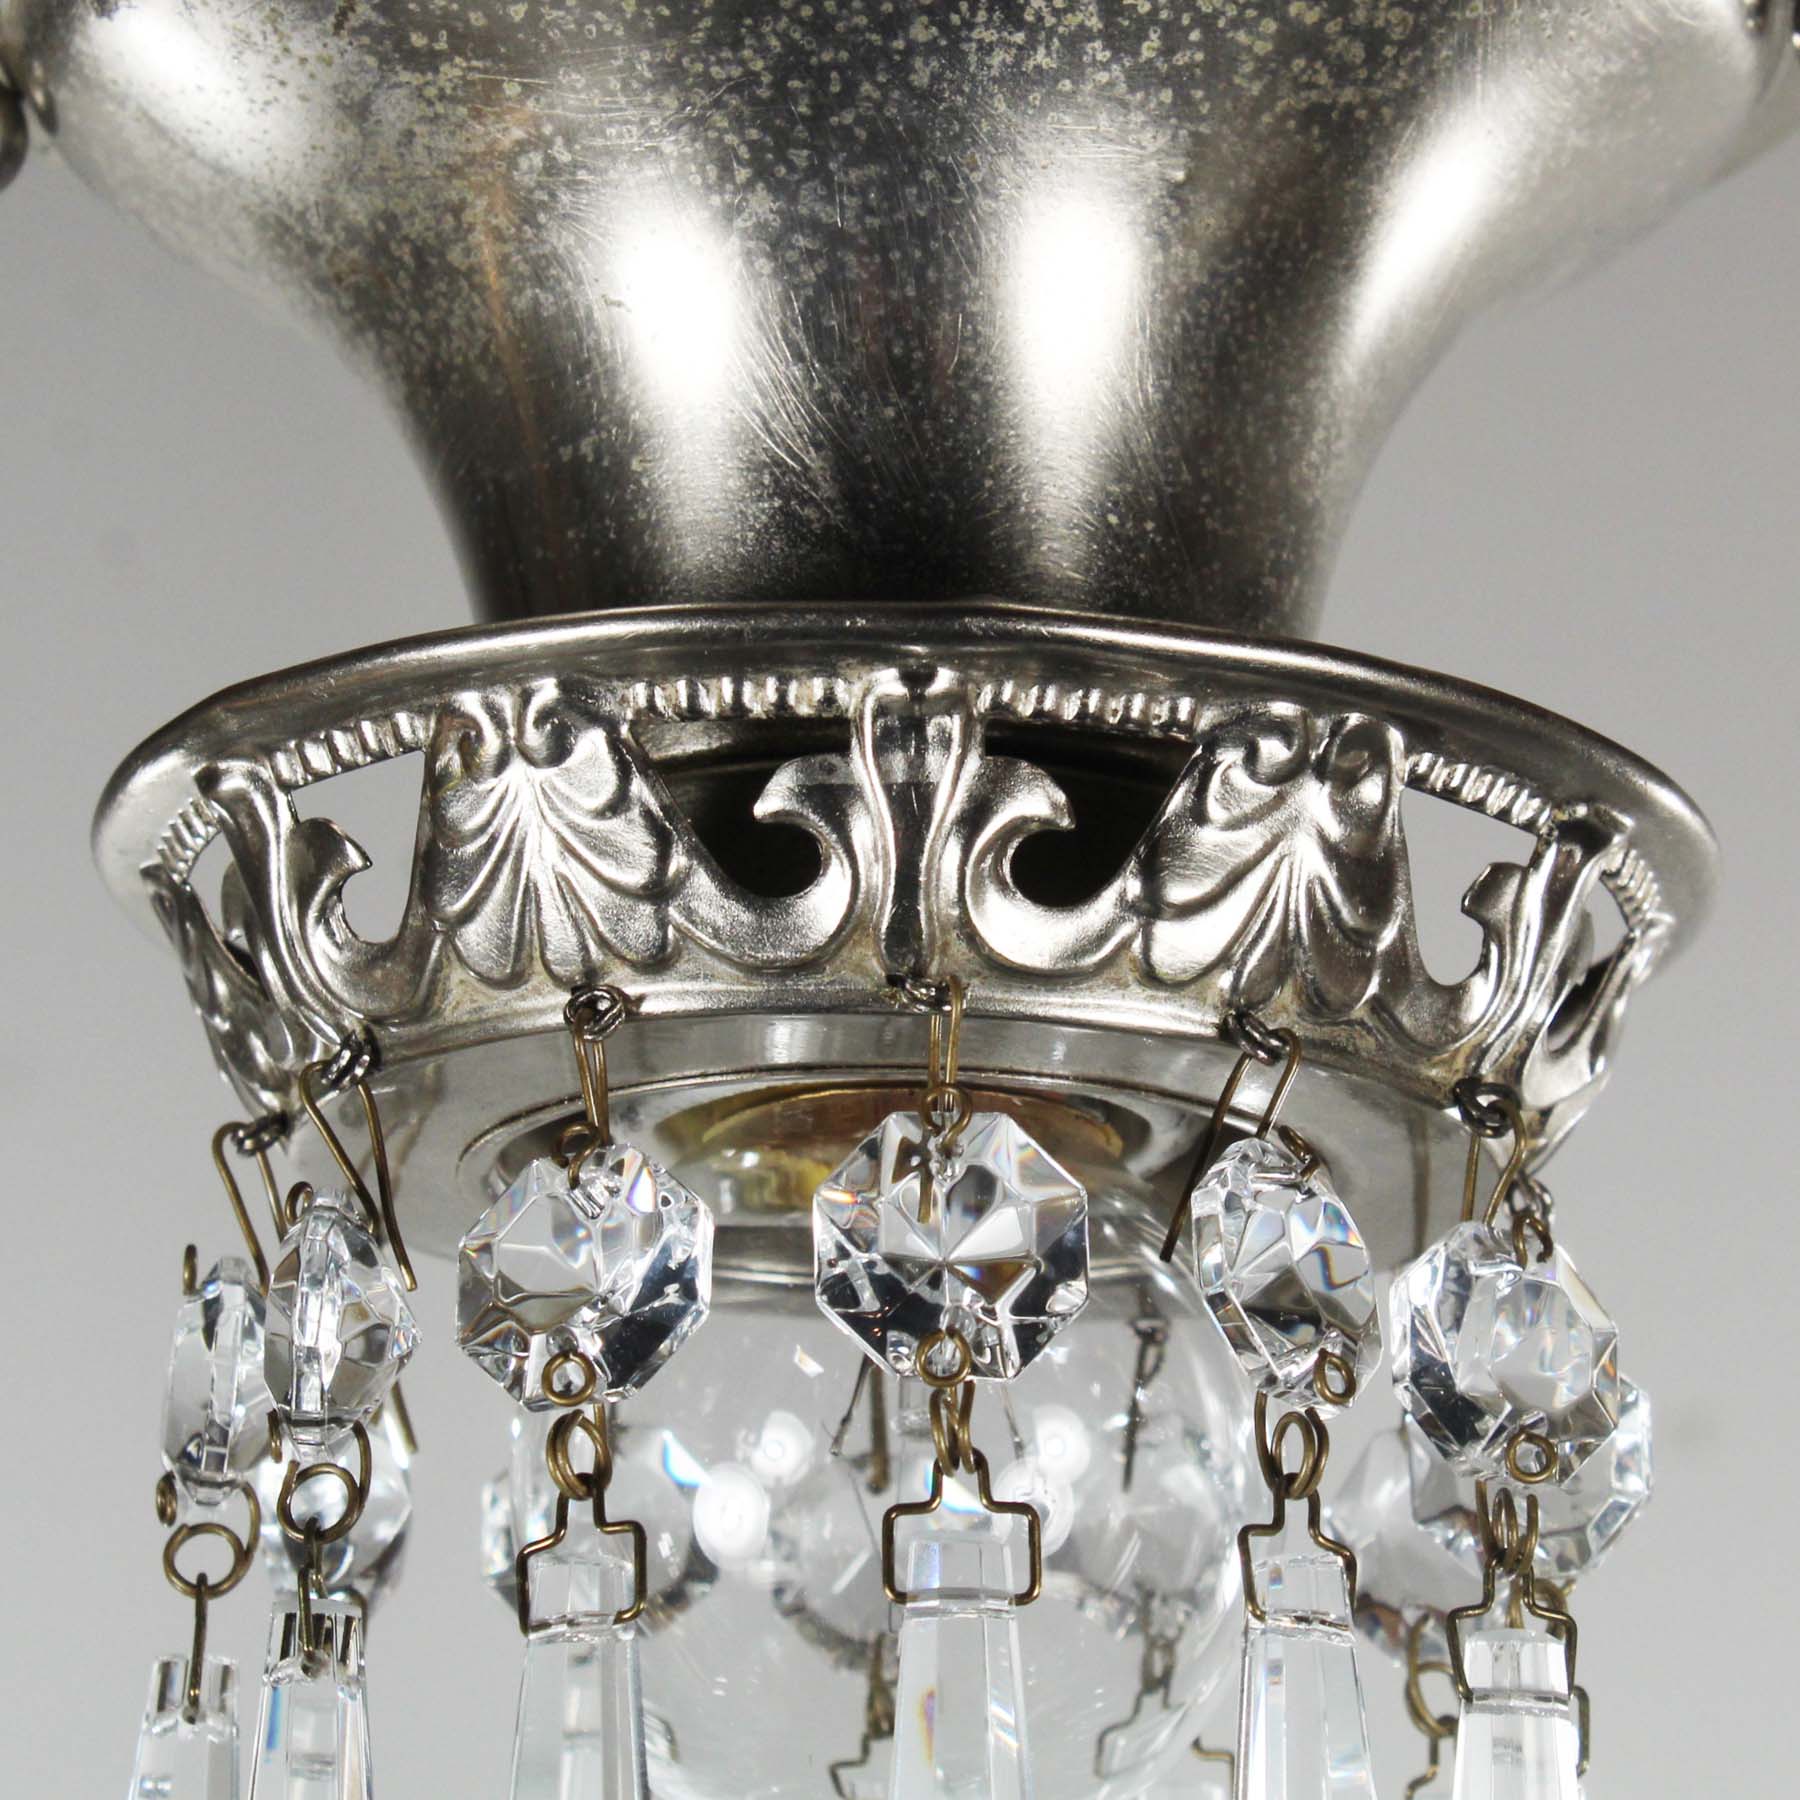 Antique Flush-Mount Lights with Exposed Bulbs and Prisms-70733